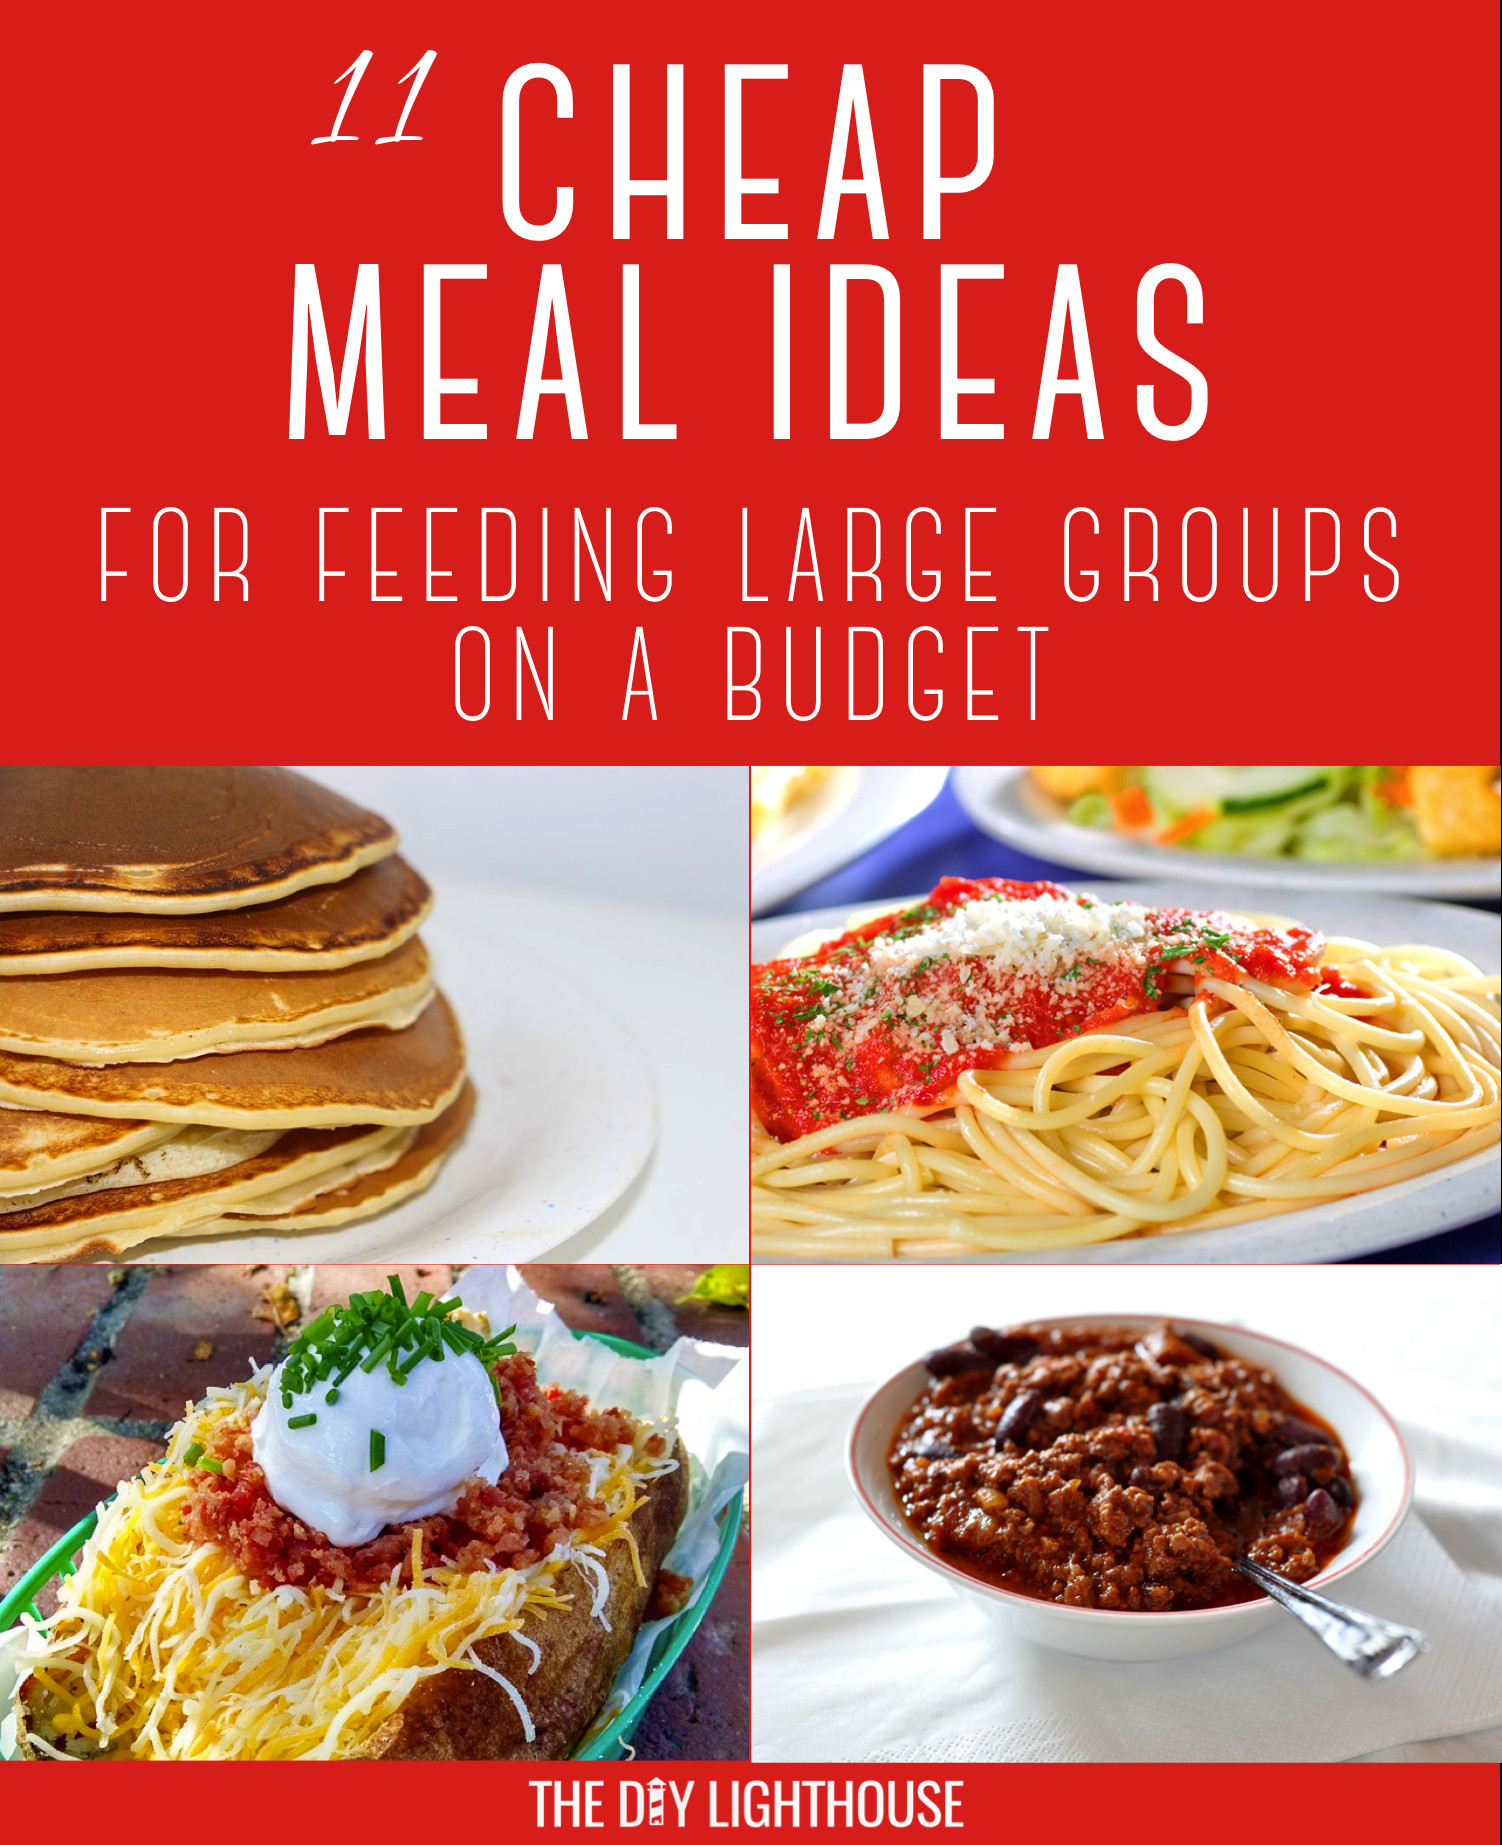 Dinner Ideas For Large Groups
 Cheap Meals for Feeding Groups